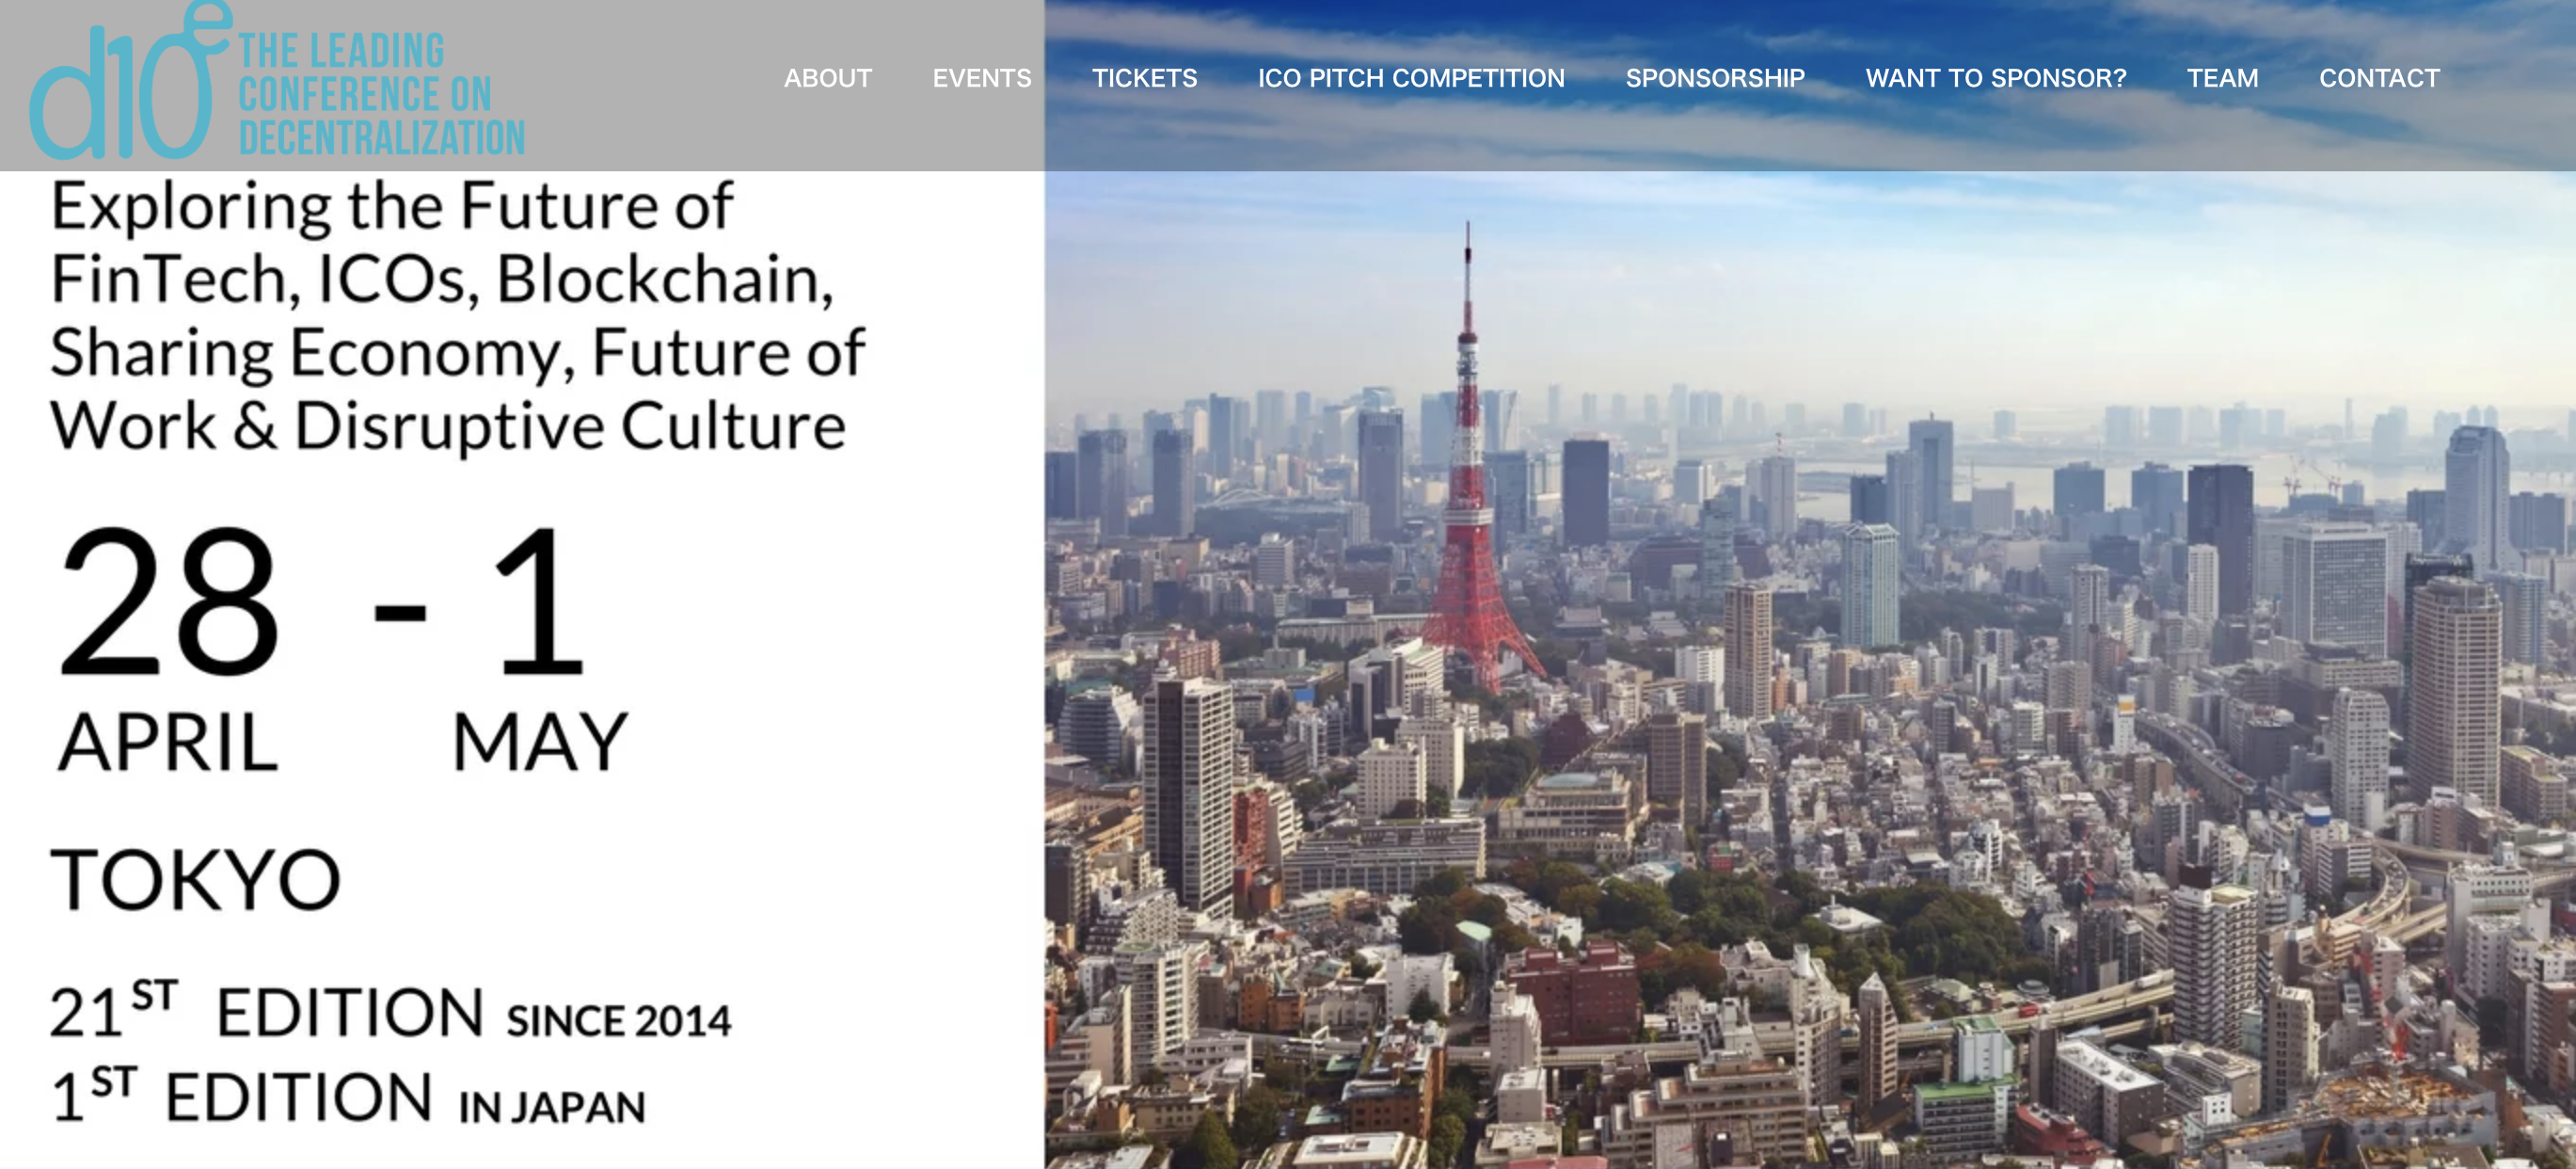 d10e – The Leading Conference On Decentralization 開催  (2018年4月28日-2018年5月1日)